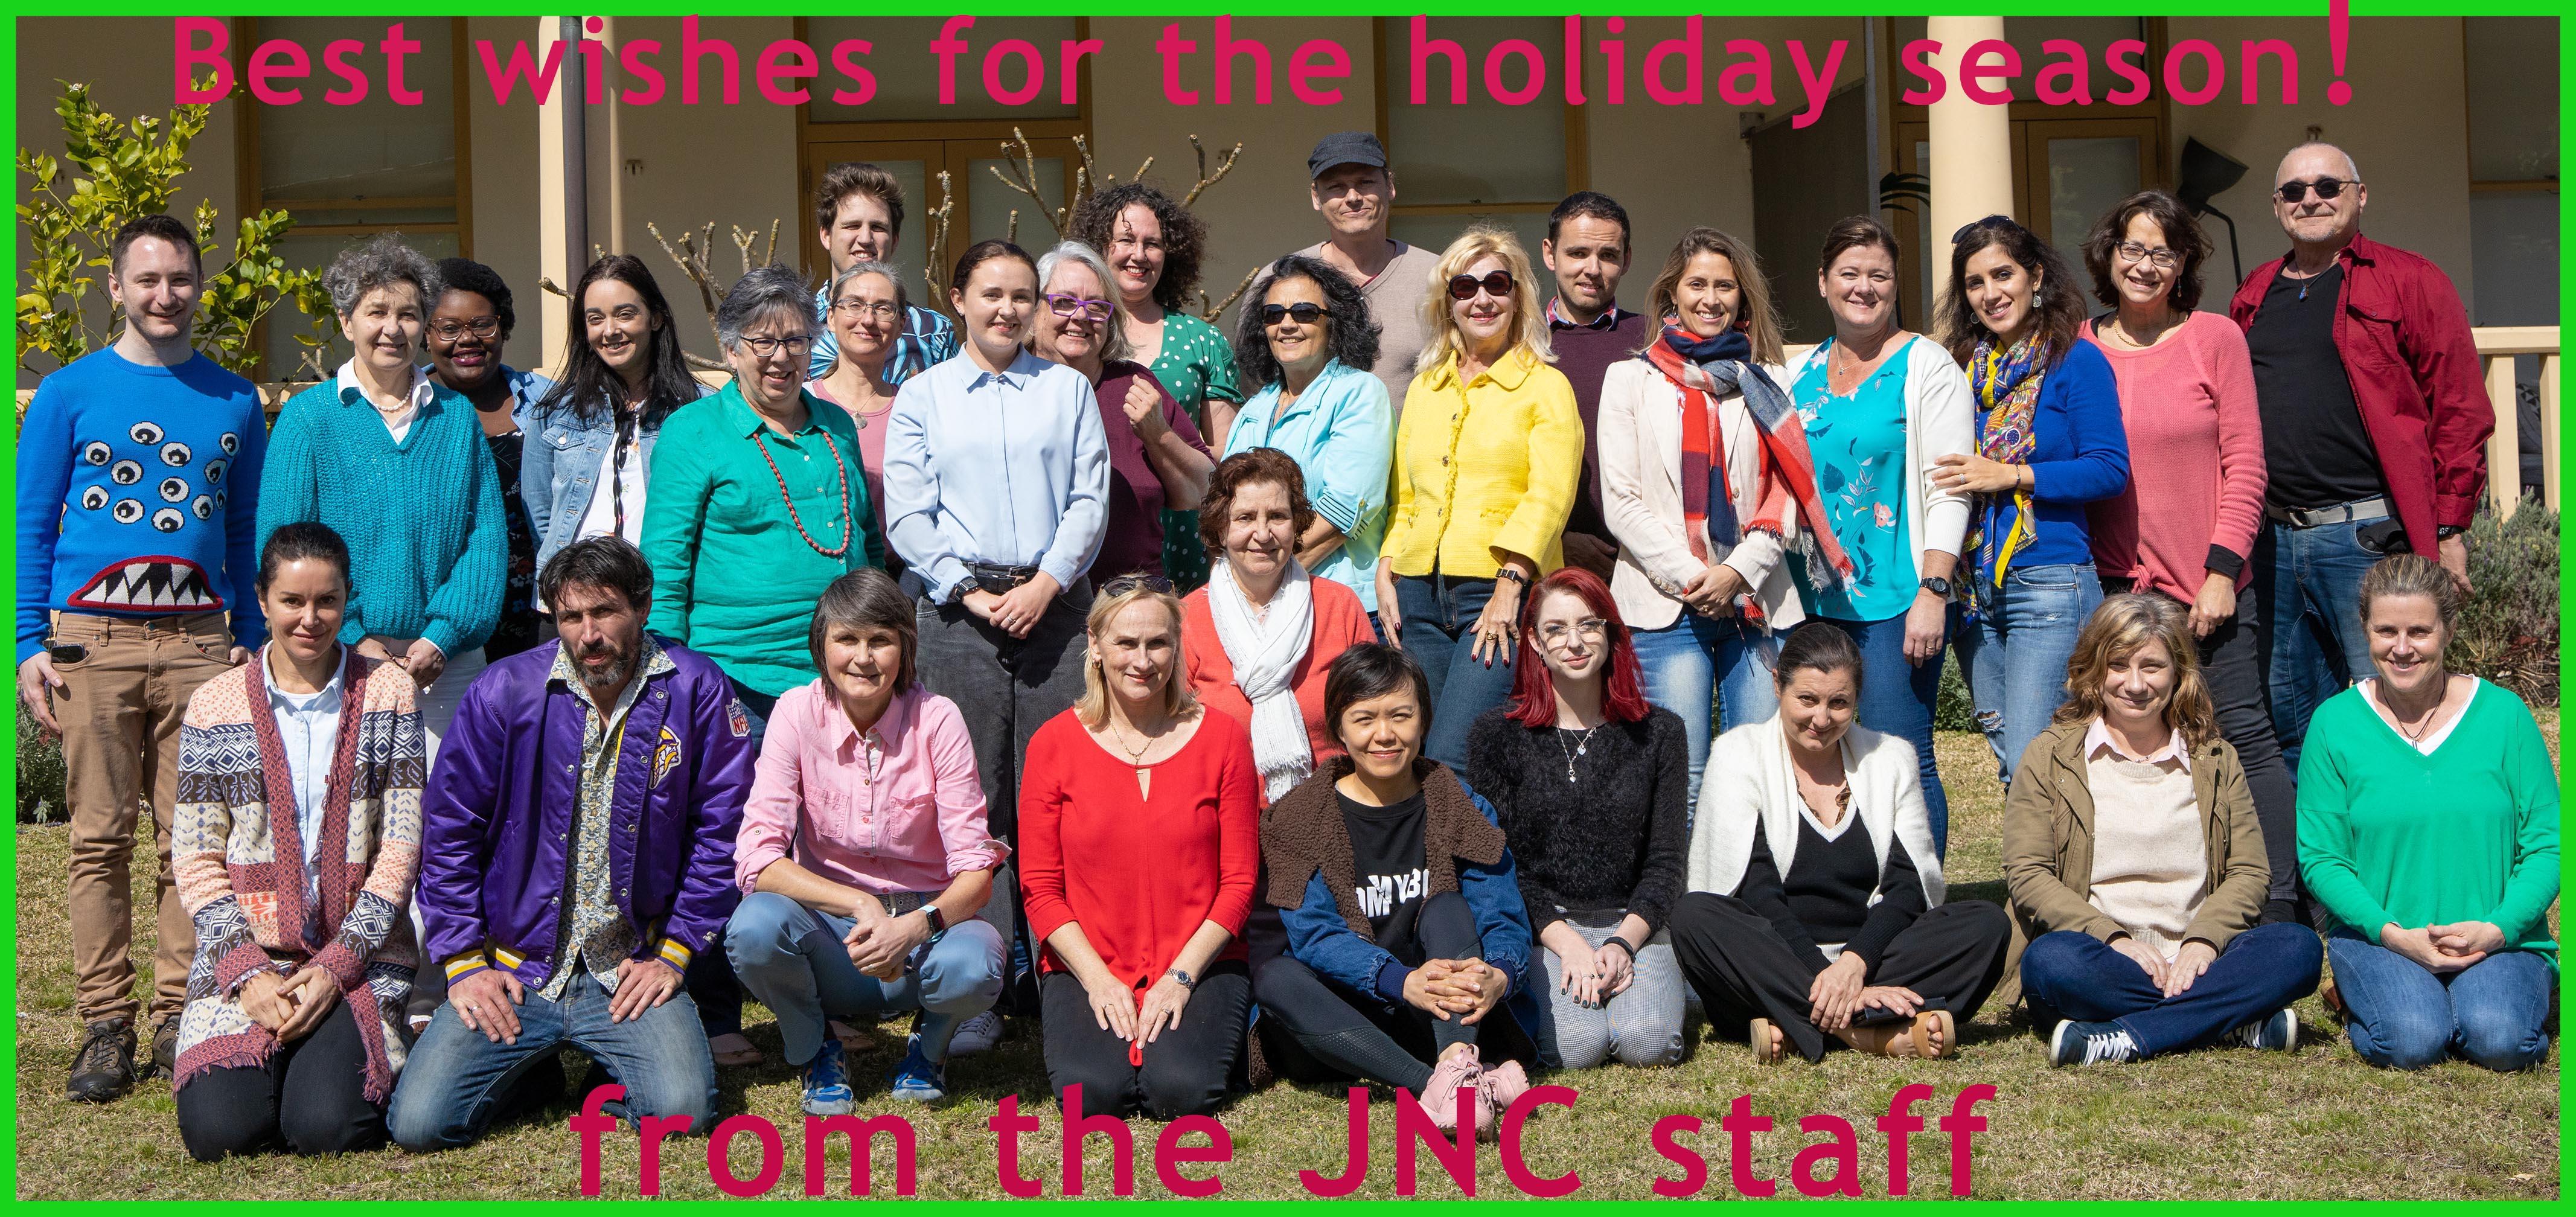 JNC staff photo offering wishes for the holiday season and looking forward to reconnecting in 2020